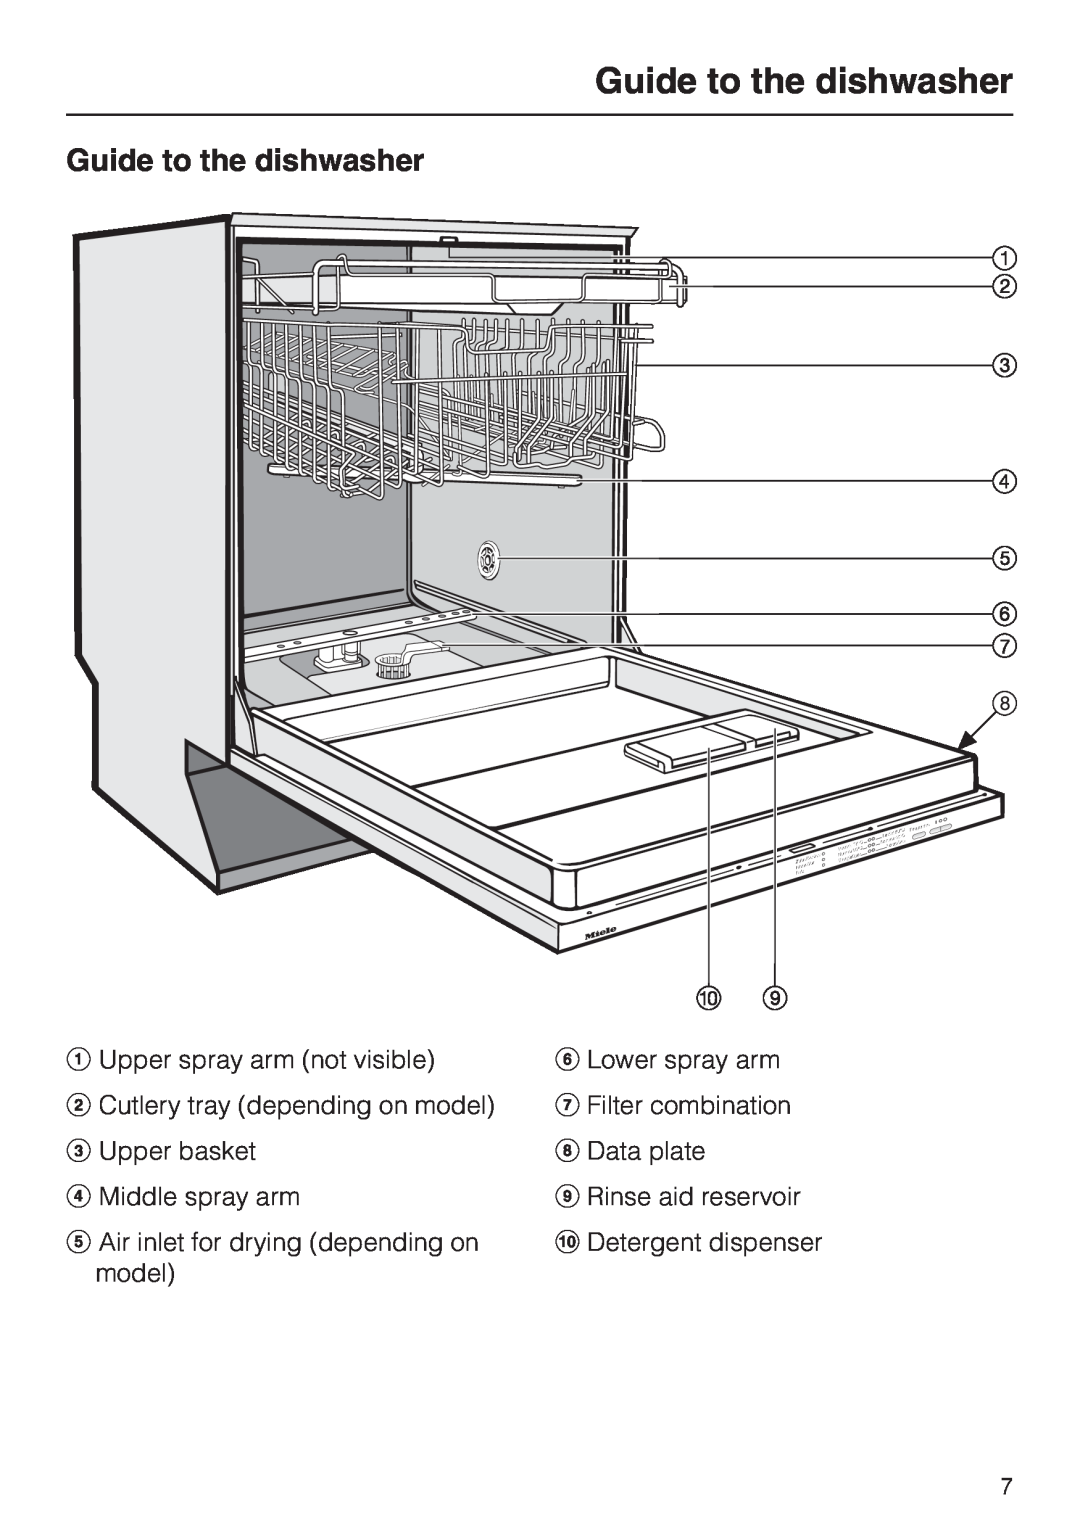 Miele G 1180 manual Guide to the dishwasher 